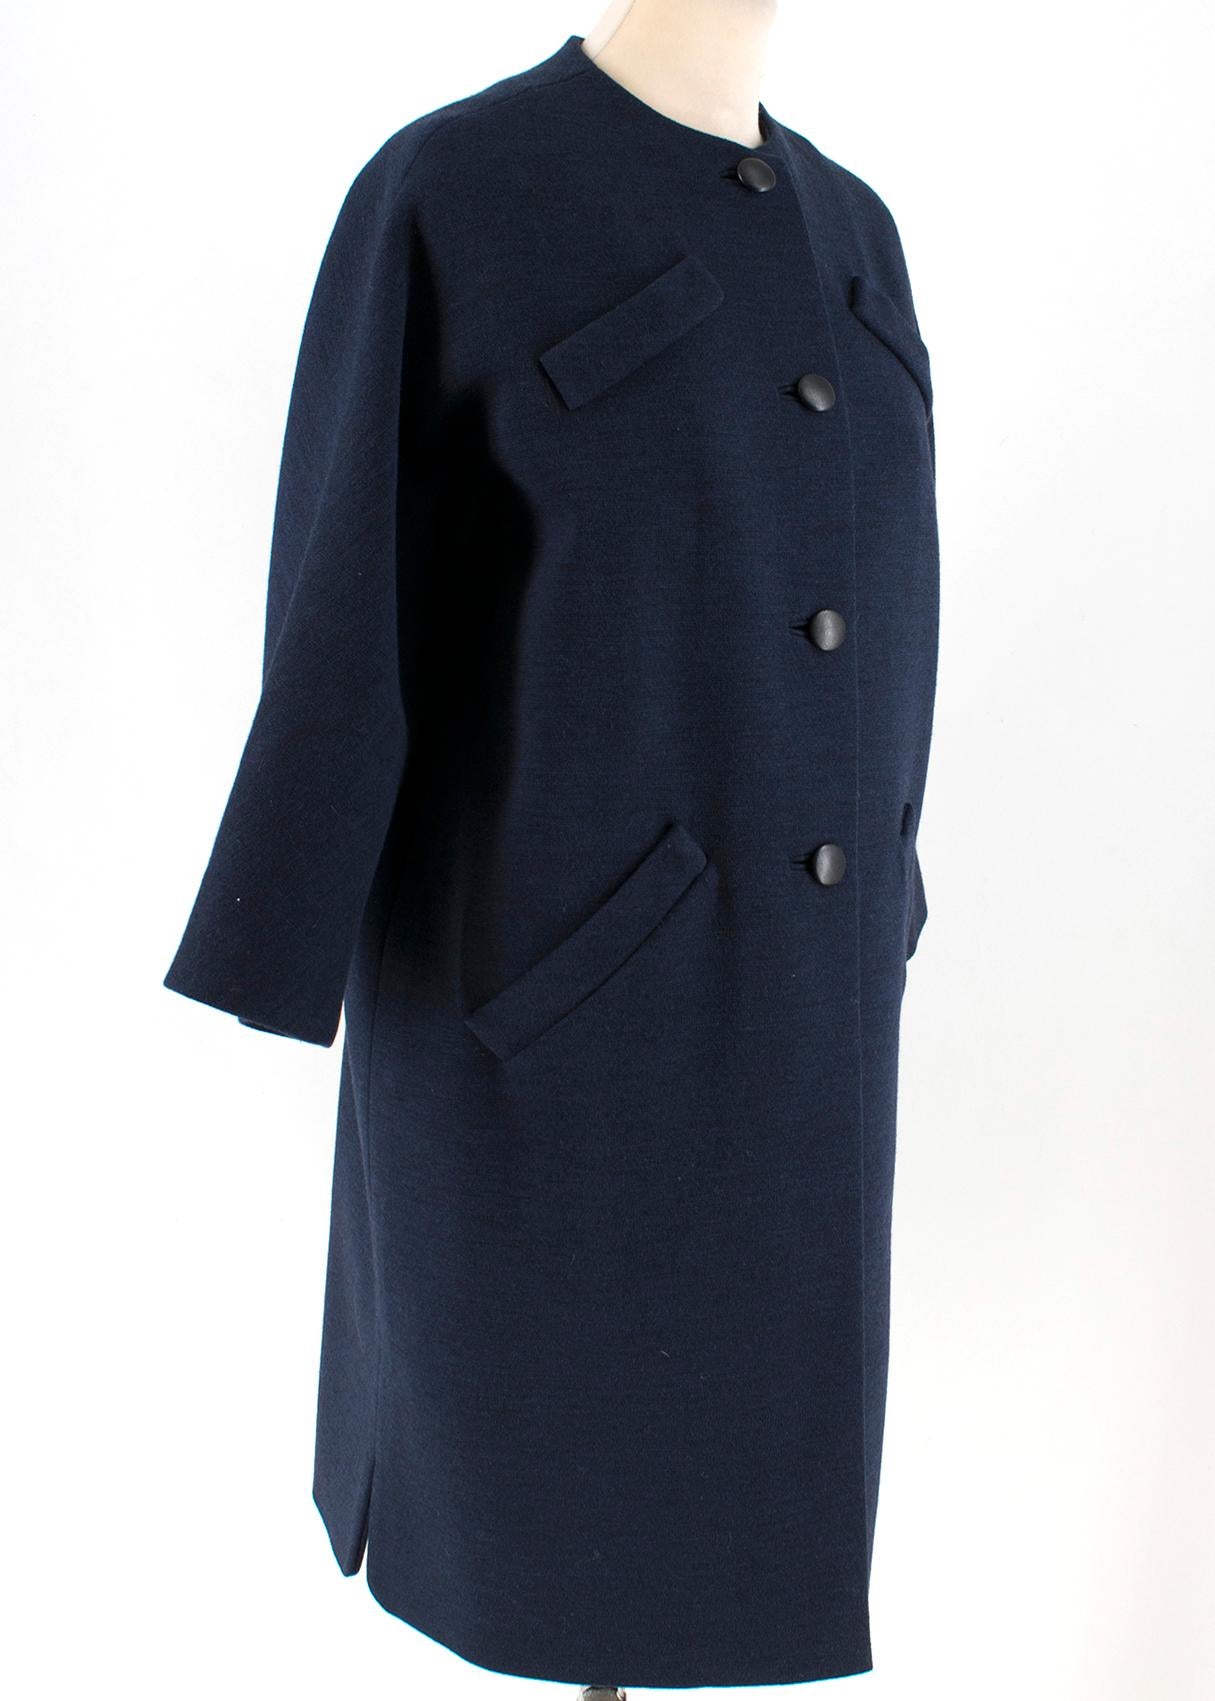 Balenciaga Navy Blue Wool Single-Breasted Coat

- Navy blue, wool coat
- Single-breasted black button fastening closure
- 3/4 sleeves
- Back vent
- Decorative buttoned strap at back
- Decorative stitch flaps at chest

Please note, these items are